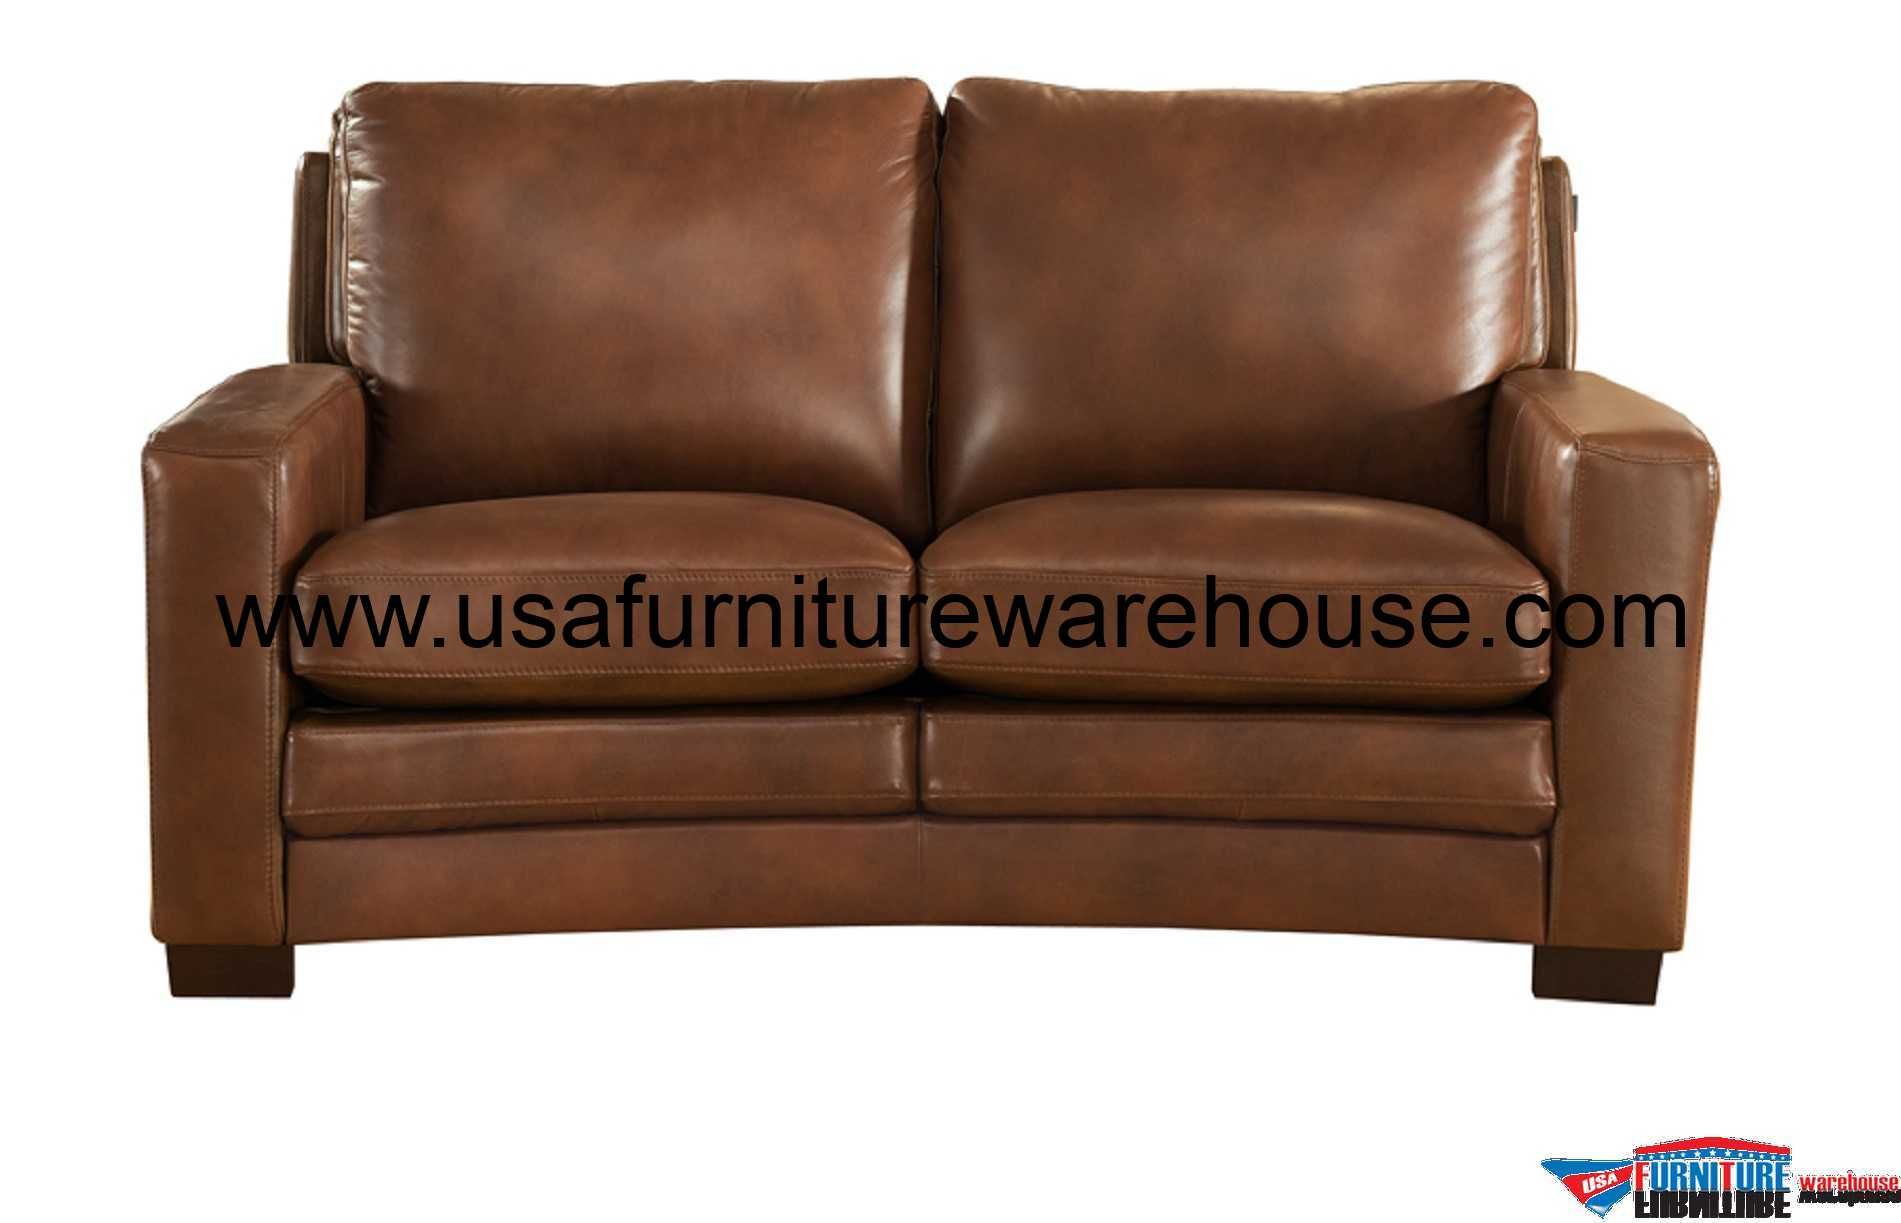 Joanna Full Top Grain Brown Leather Loveseat – Usa Furniture Warehouse With Regard To Top Grain Leather Loveseats (View 4 of 20)